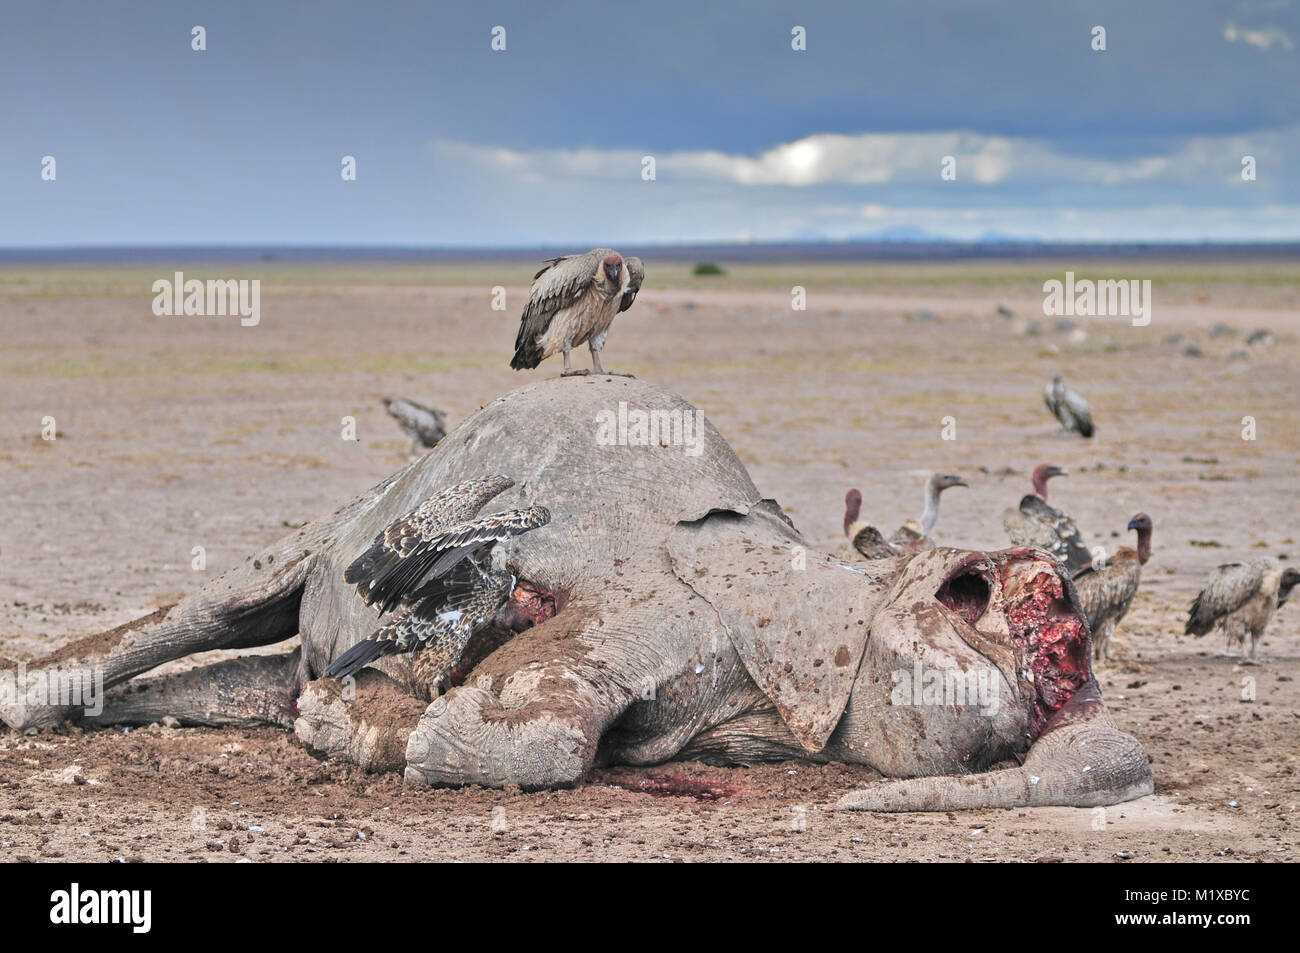 White Backed Vulture feeding on corpse of African Elephant (Loxodonta africana) which died during worst drought in living memory. Amboseli. Kenya. Stock Photo